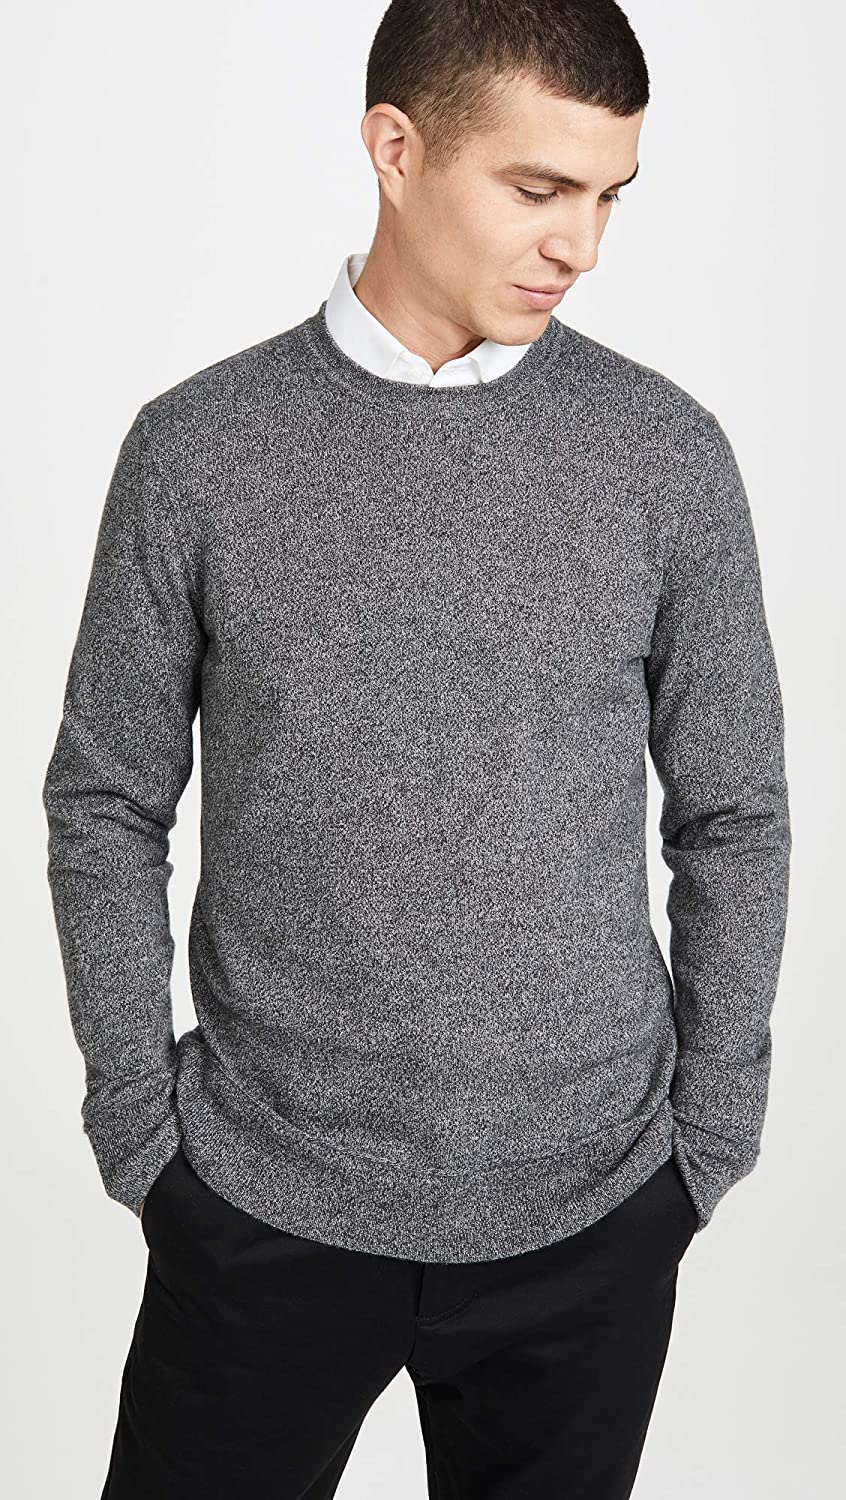 Theory Men's Hilles Crew Neck Cashmere Sweater | eBay